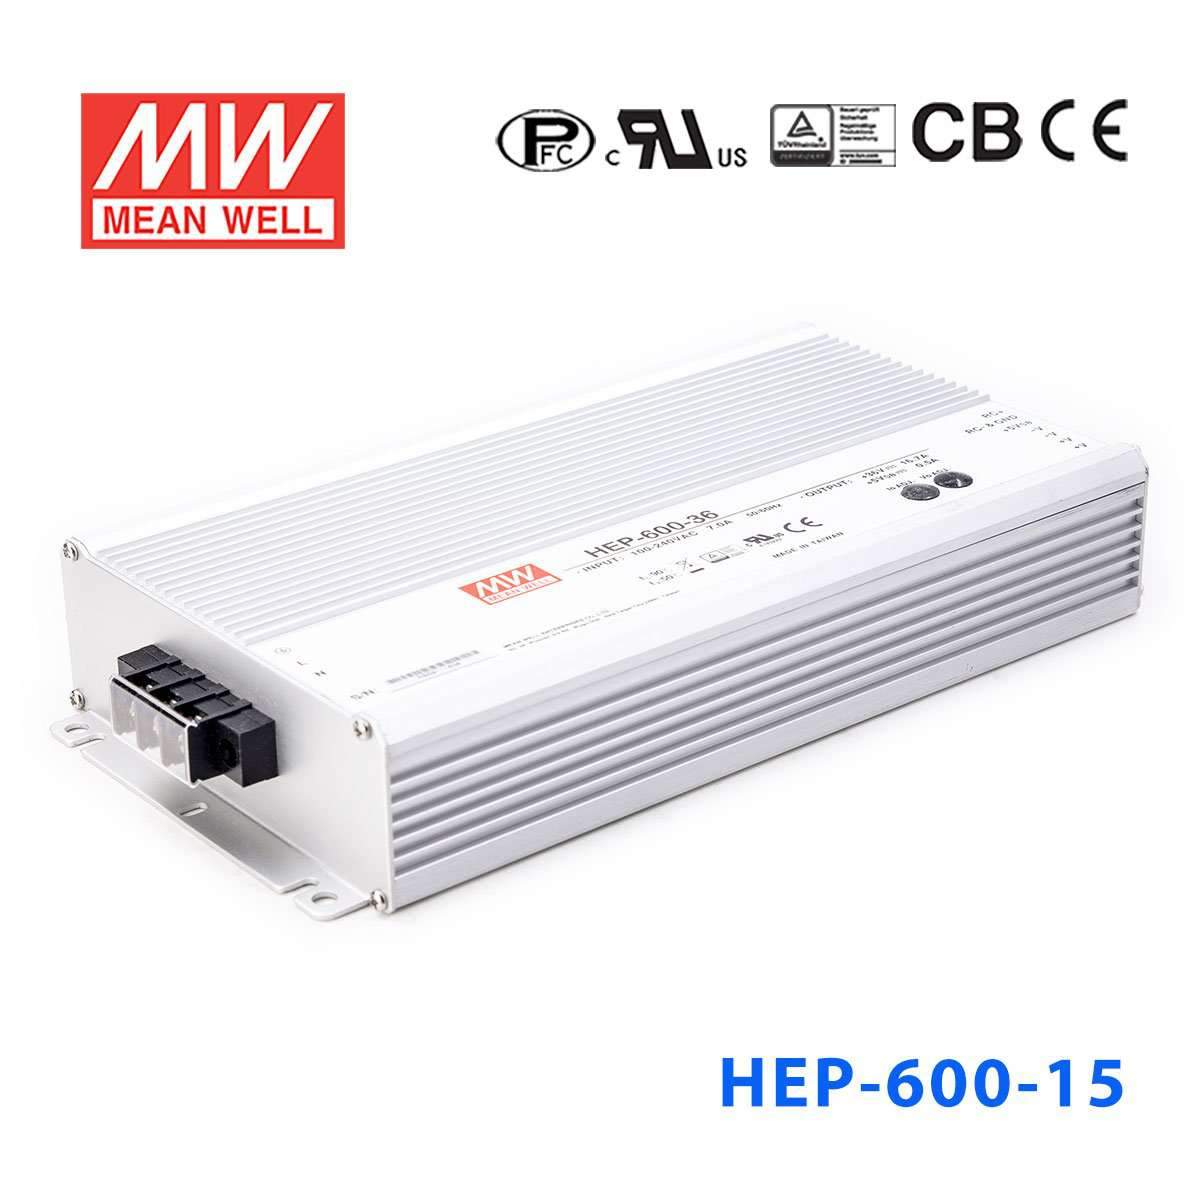 Mean Well HEP-600-15 Power Supply 540W 15V